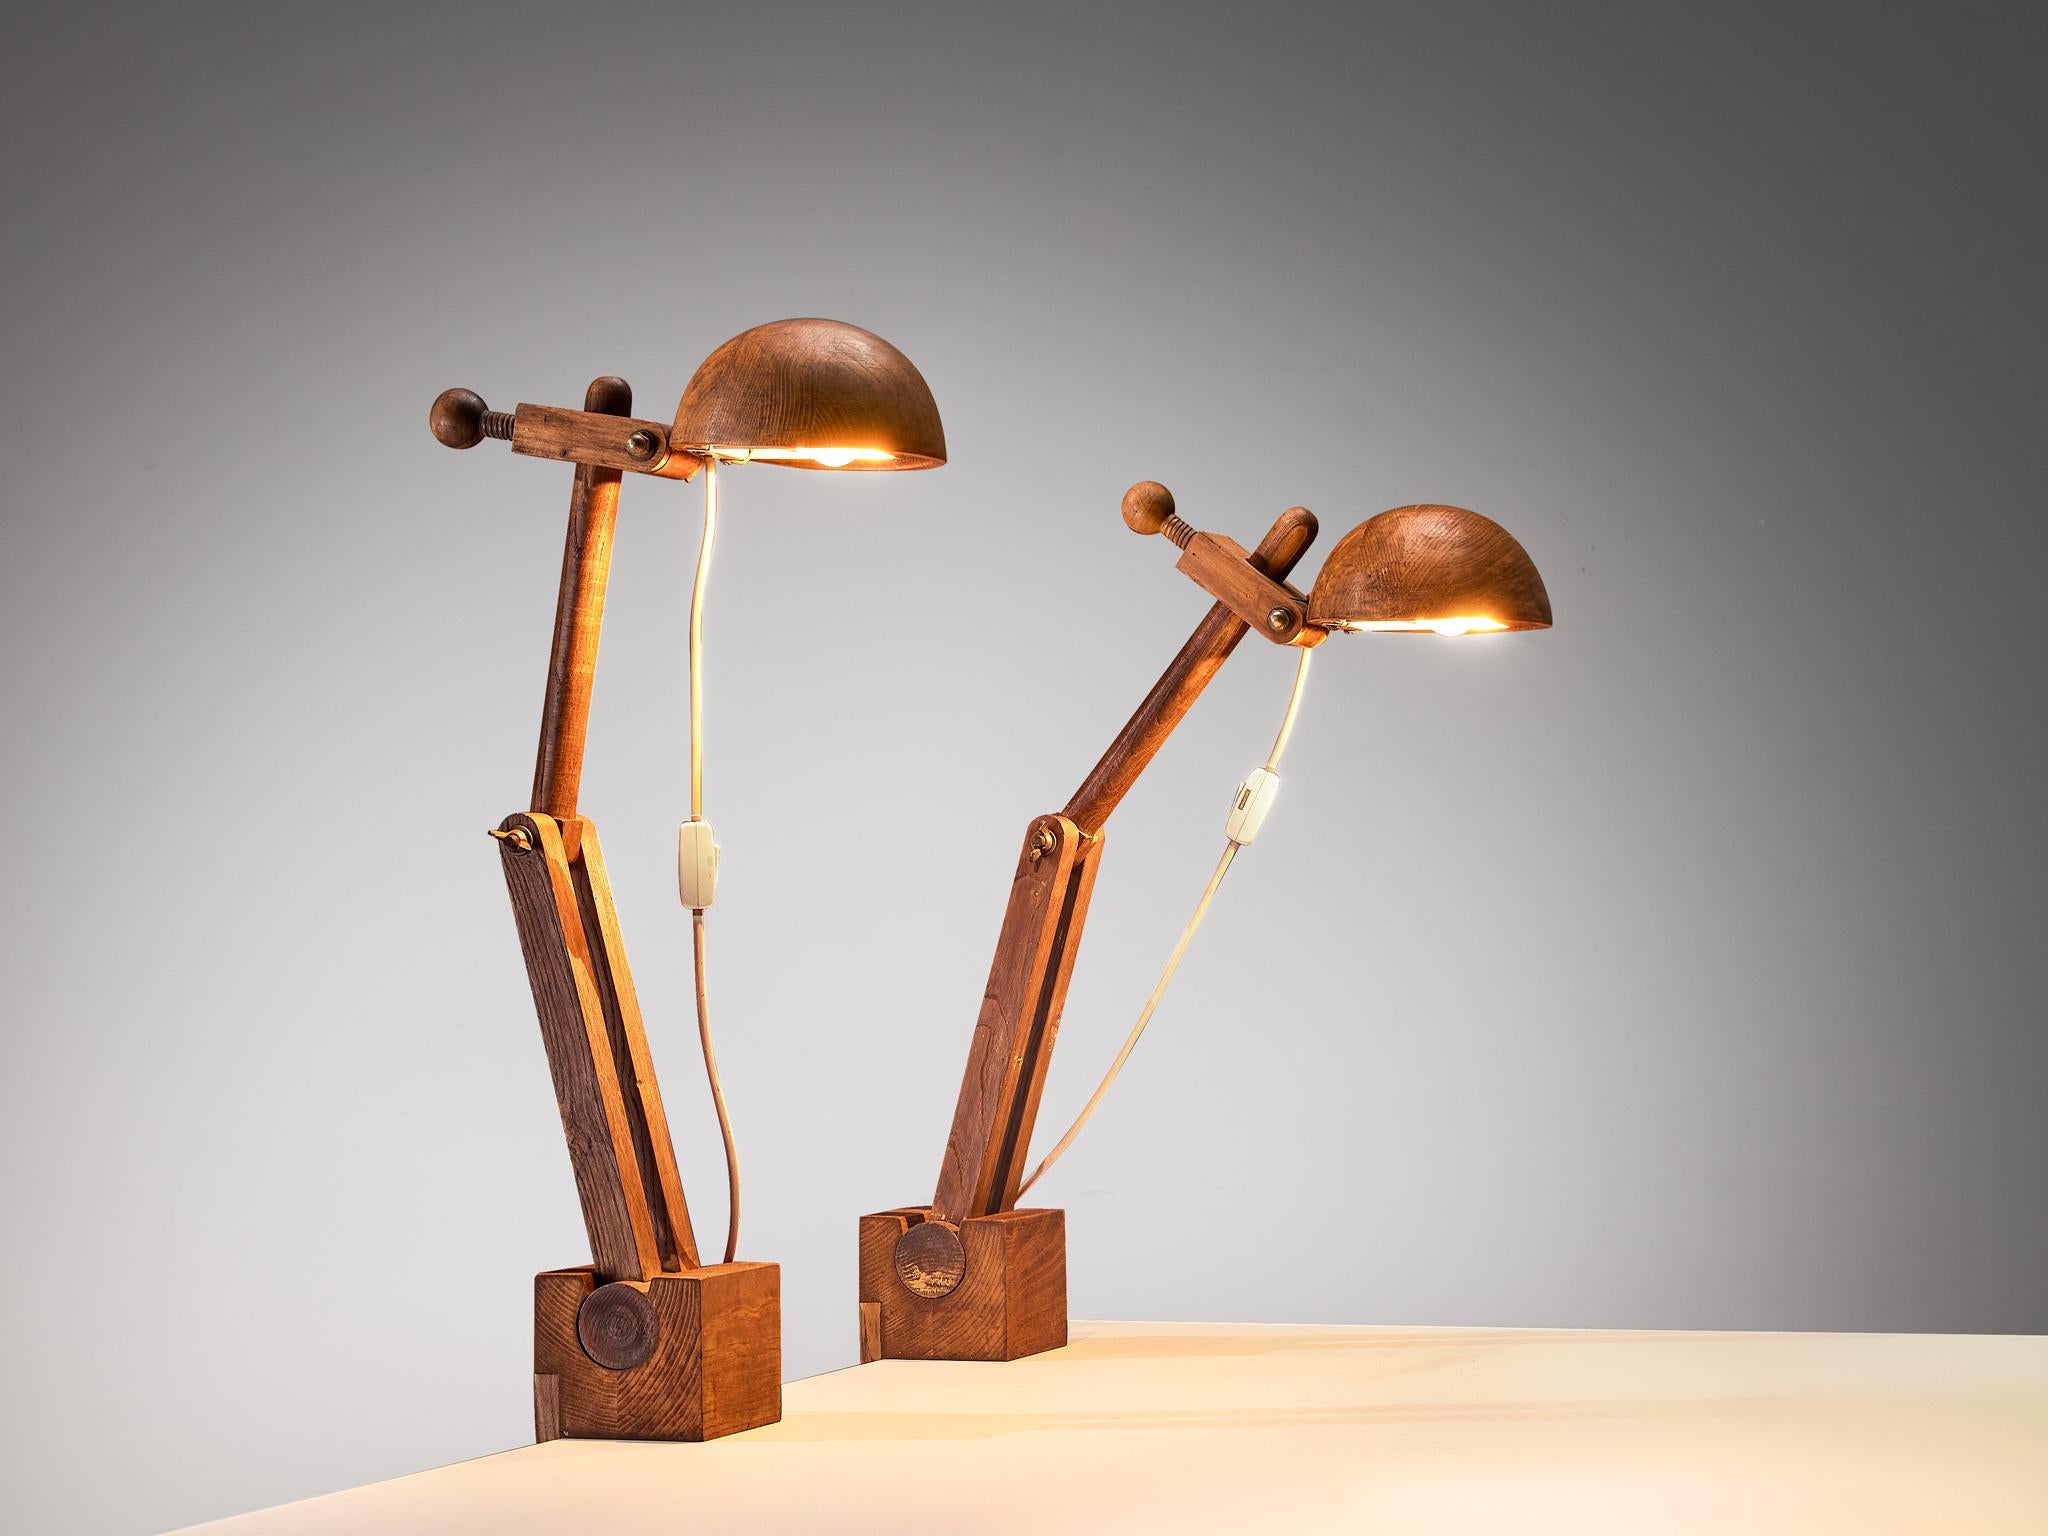 Paolo Pallucco for Pallucco Roma, desk lamps, chestnut, Italy, 1960s

A distinctive clamp desk lamp, thoughtfully designed by Paolo Pallucco, not only offers functionality but also visual appeal. Crafted from solid chestnut, it features a